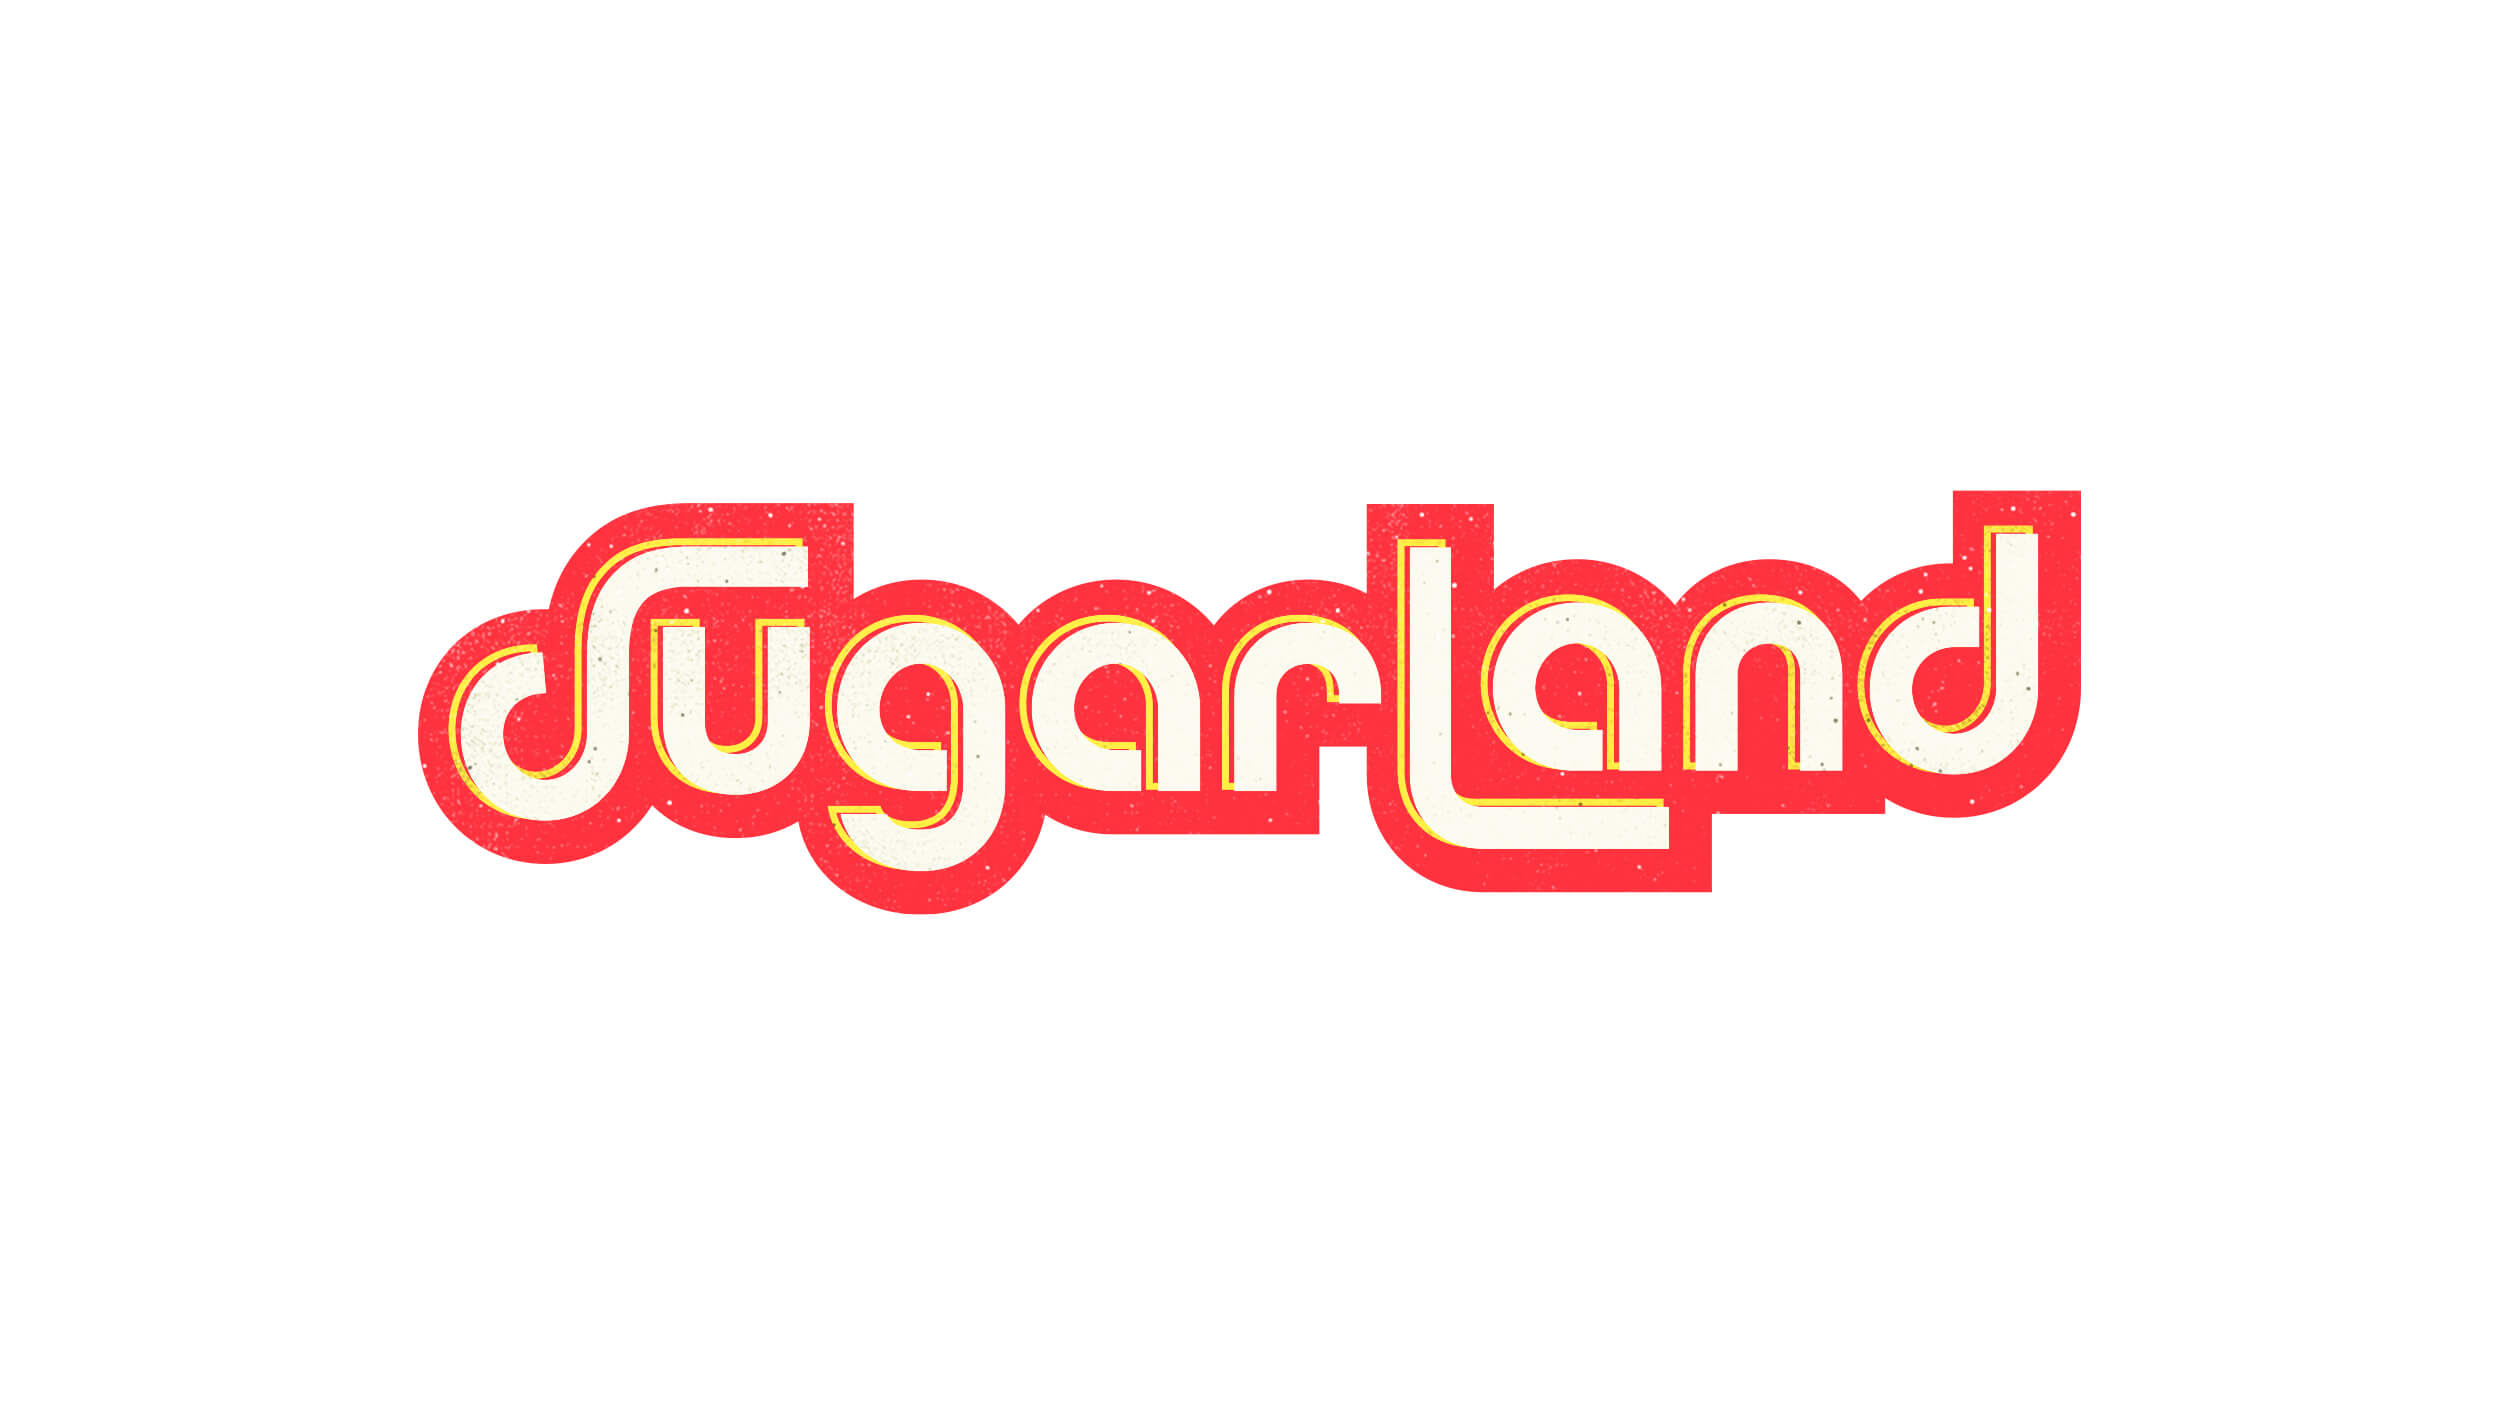 Logo and album branding for the country music duo, Sugarland.